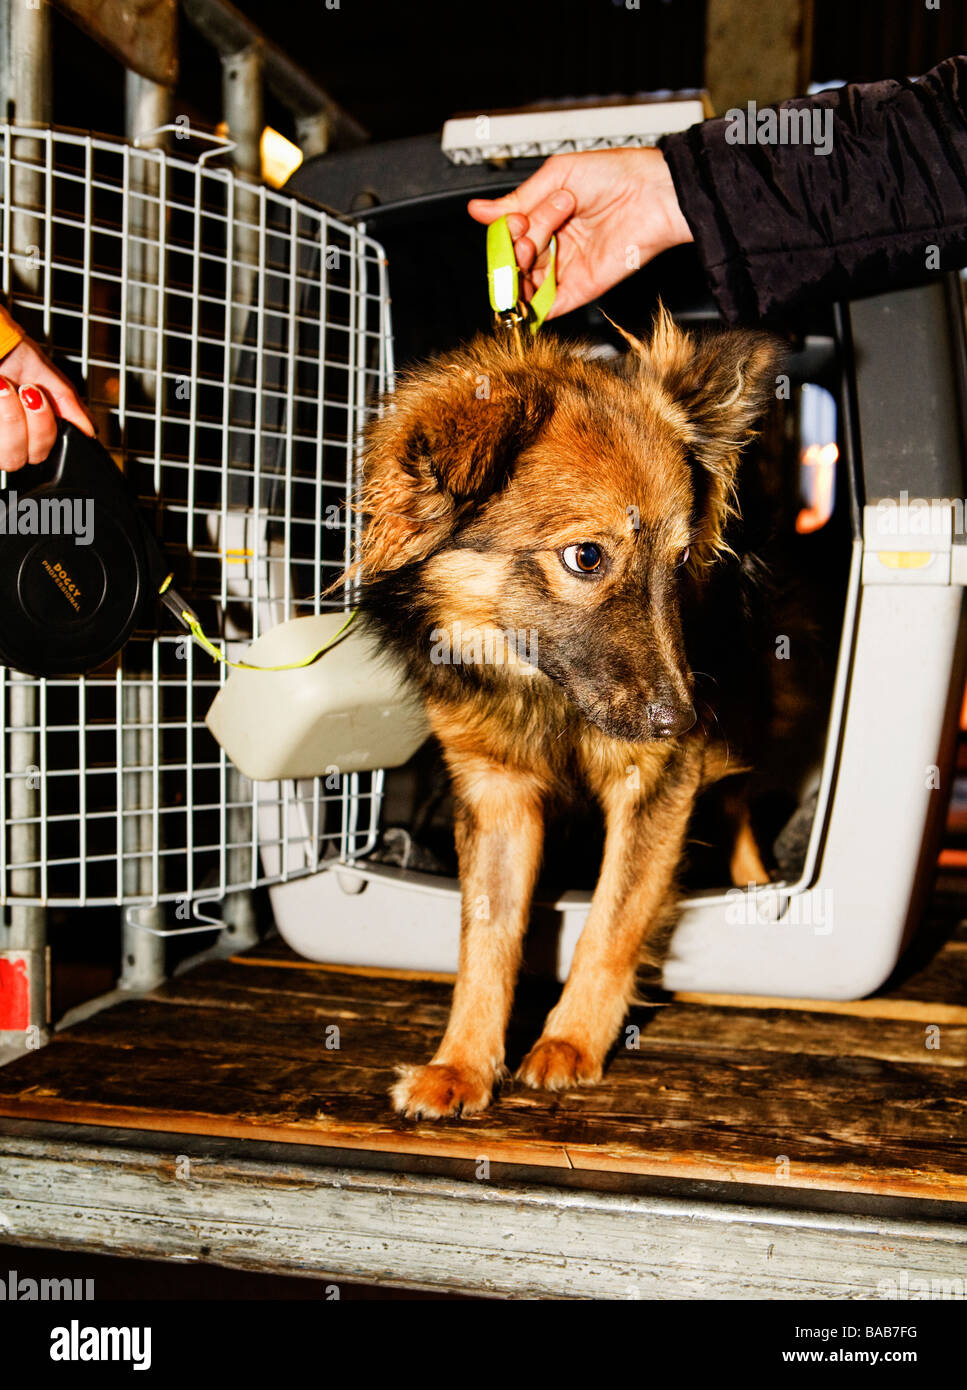 A Dog Coming Out From A Travelling Cage Stock Photo